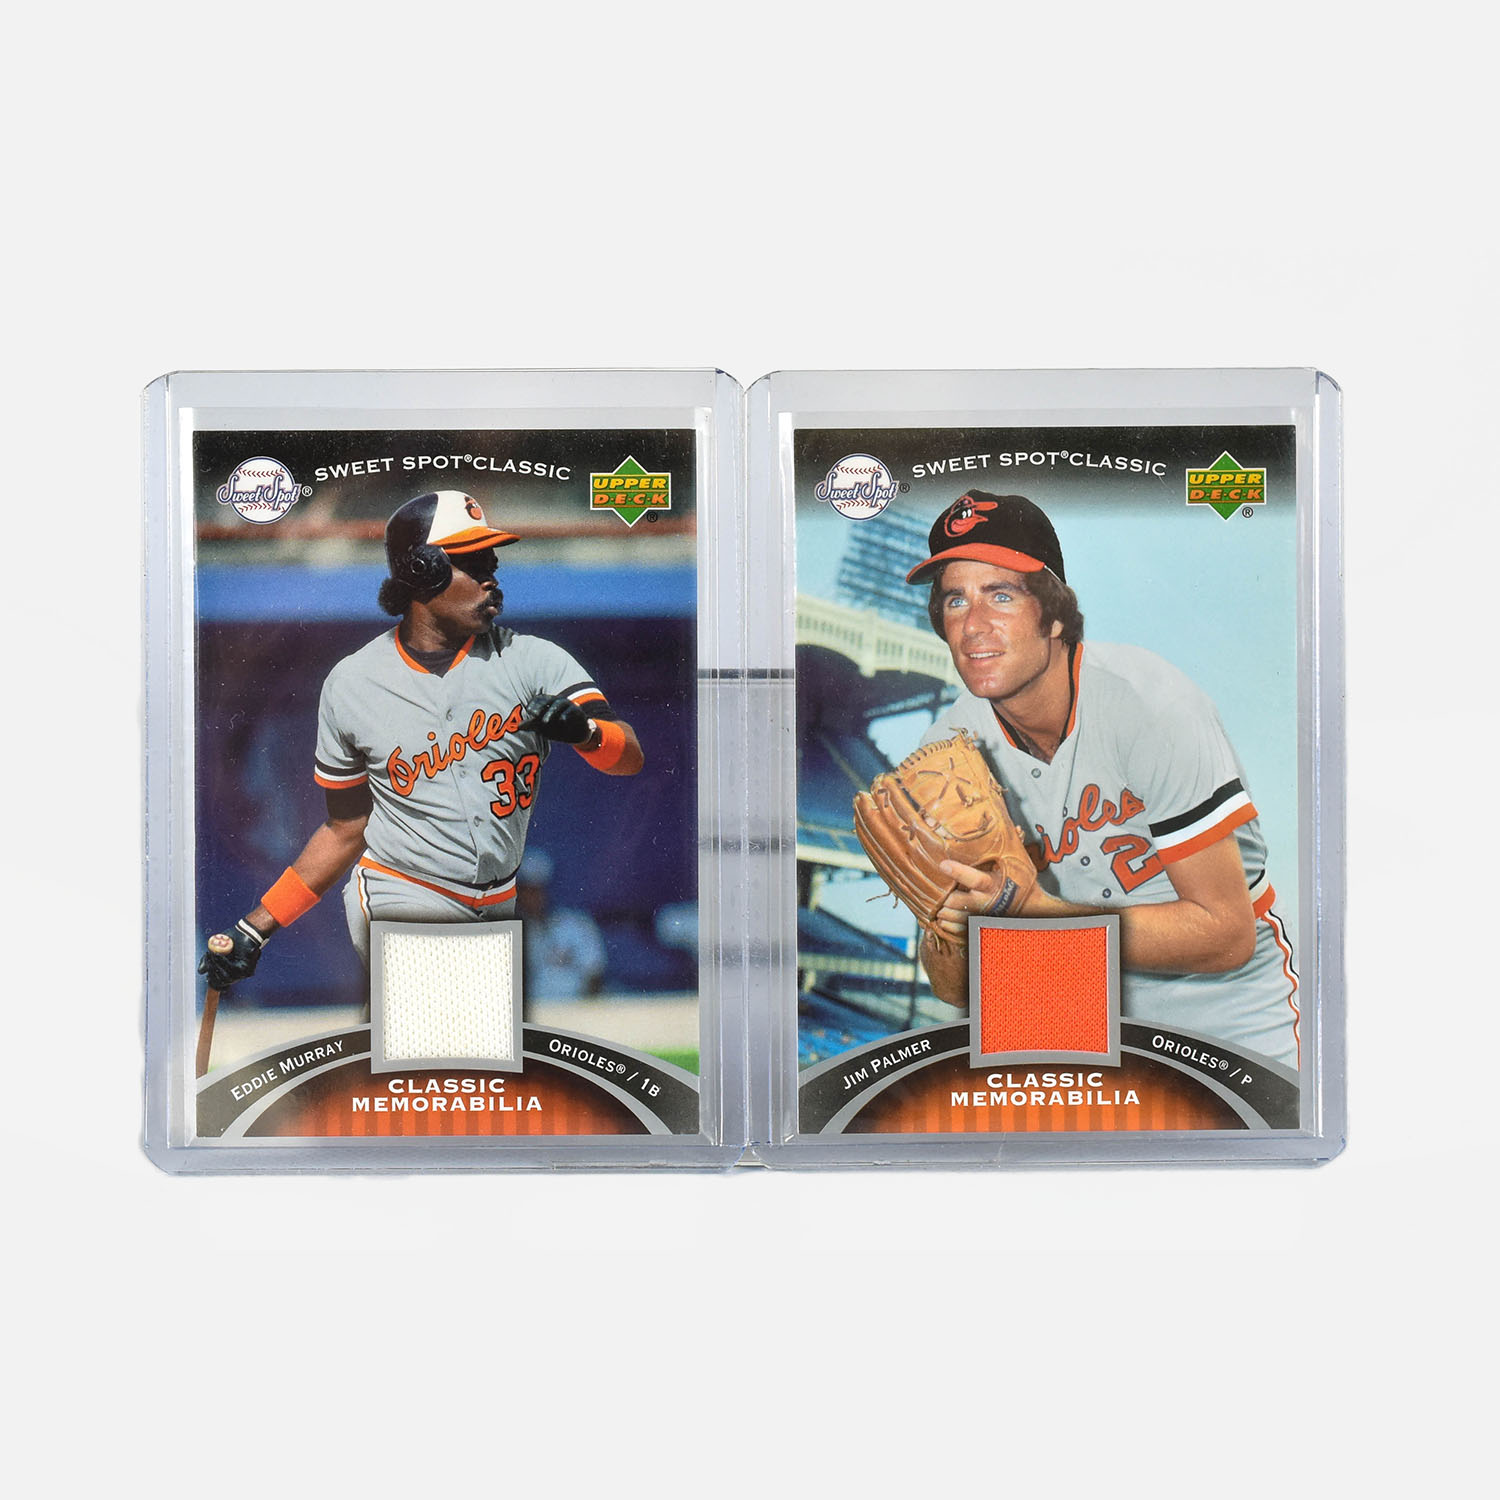 Two 2007 Upper Deck Sweet Spot Classic Baltimore Orioles Classic Memoribilia Baseball Cards with Extra 400 Plus Cards